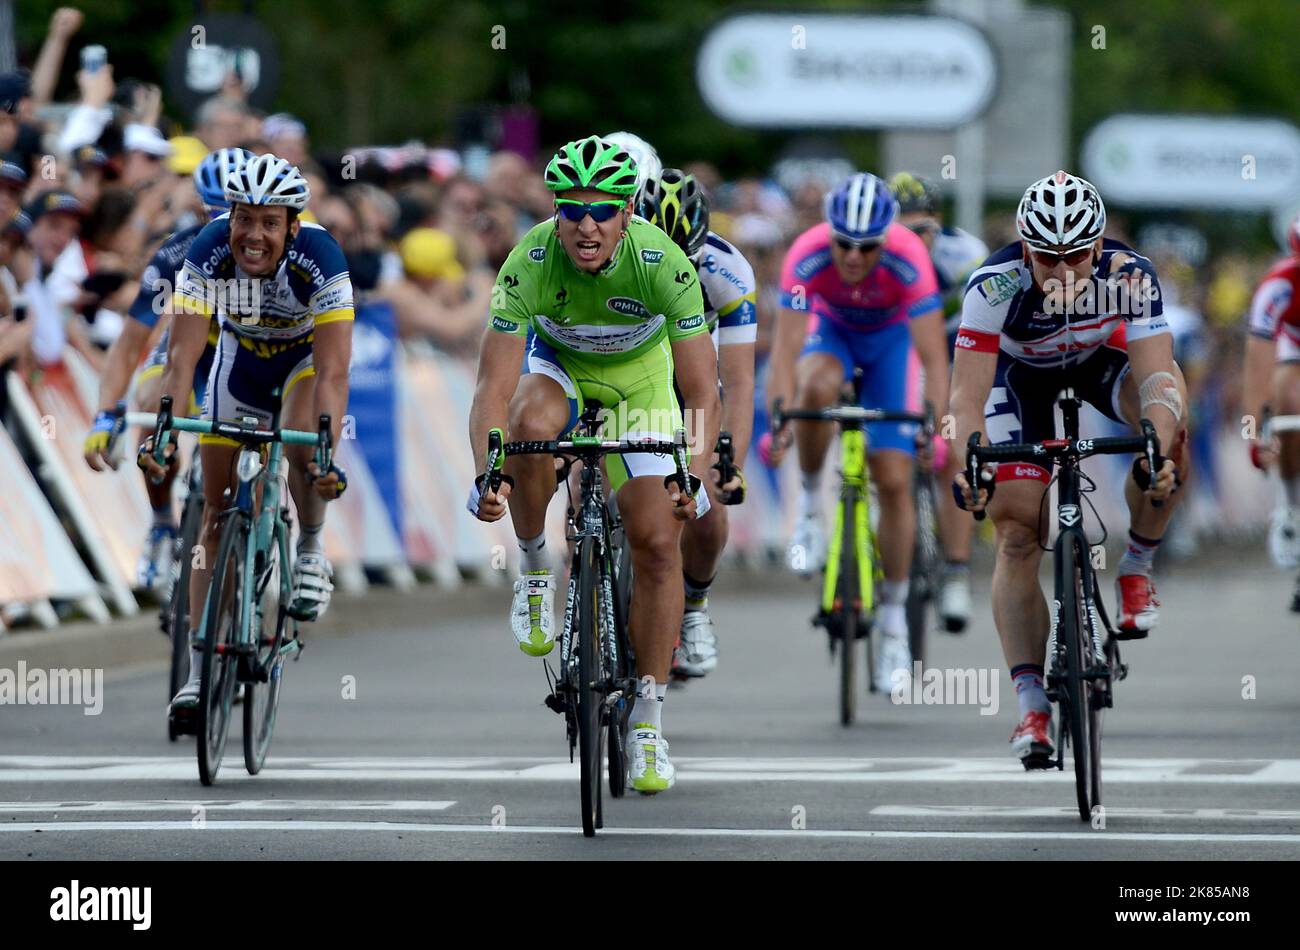 Peter Sagan takes the stage win ahead of Andre Greipel and Matthew Goss and Kenny Rober Van Hummel during Stage 6 of the 2012 Tour de France  Stock Photo